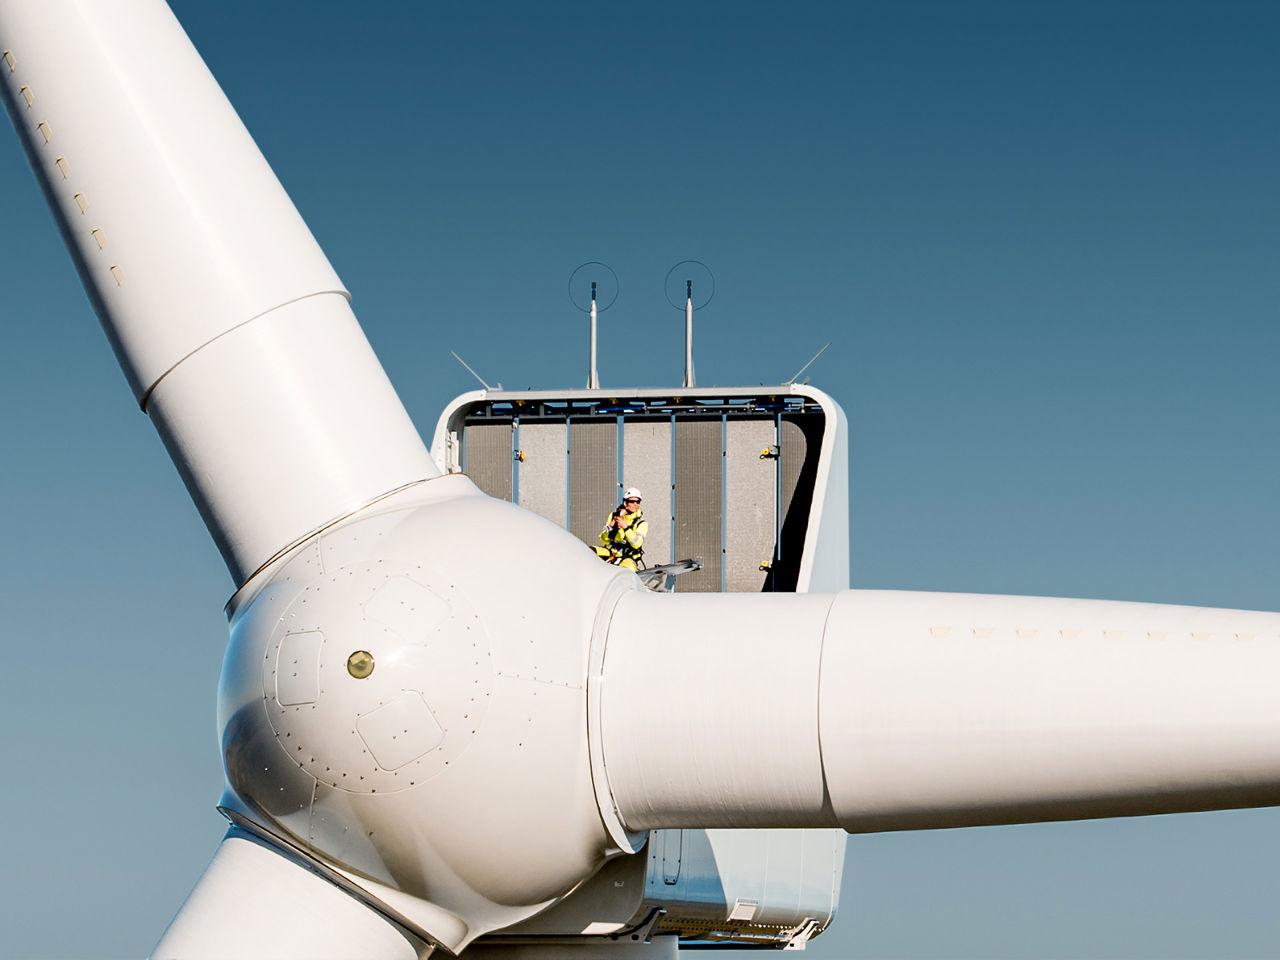 Top of a wind turbine with a Statkraft employee in the top for inspections